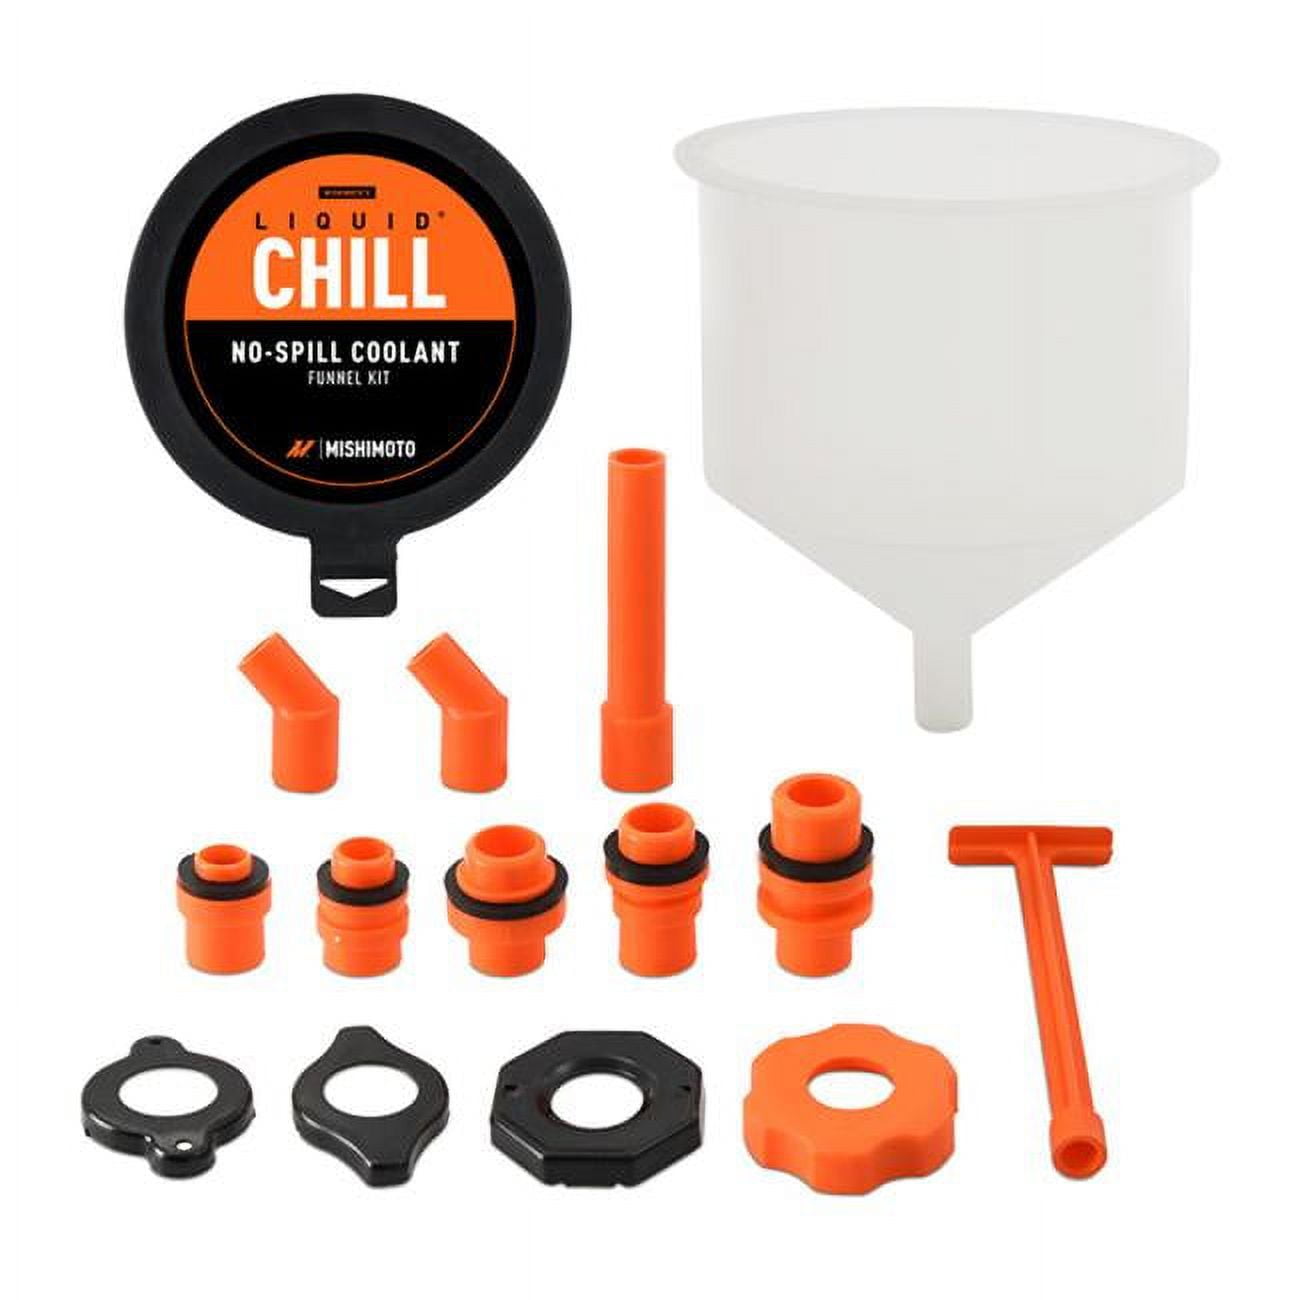 RACOONA Coolant Funnel Kit,Coolant Funnel Radiator Flush Kit,Car  Accessories No Spill Coolant Bleeder Kit,Spill Free Radiator Bleeder Funnel